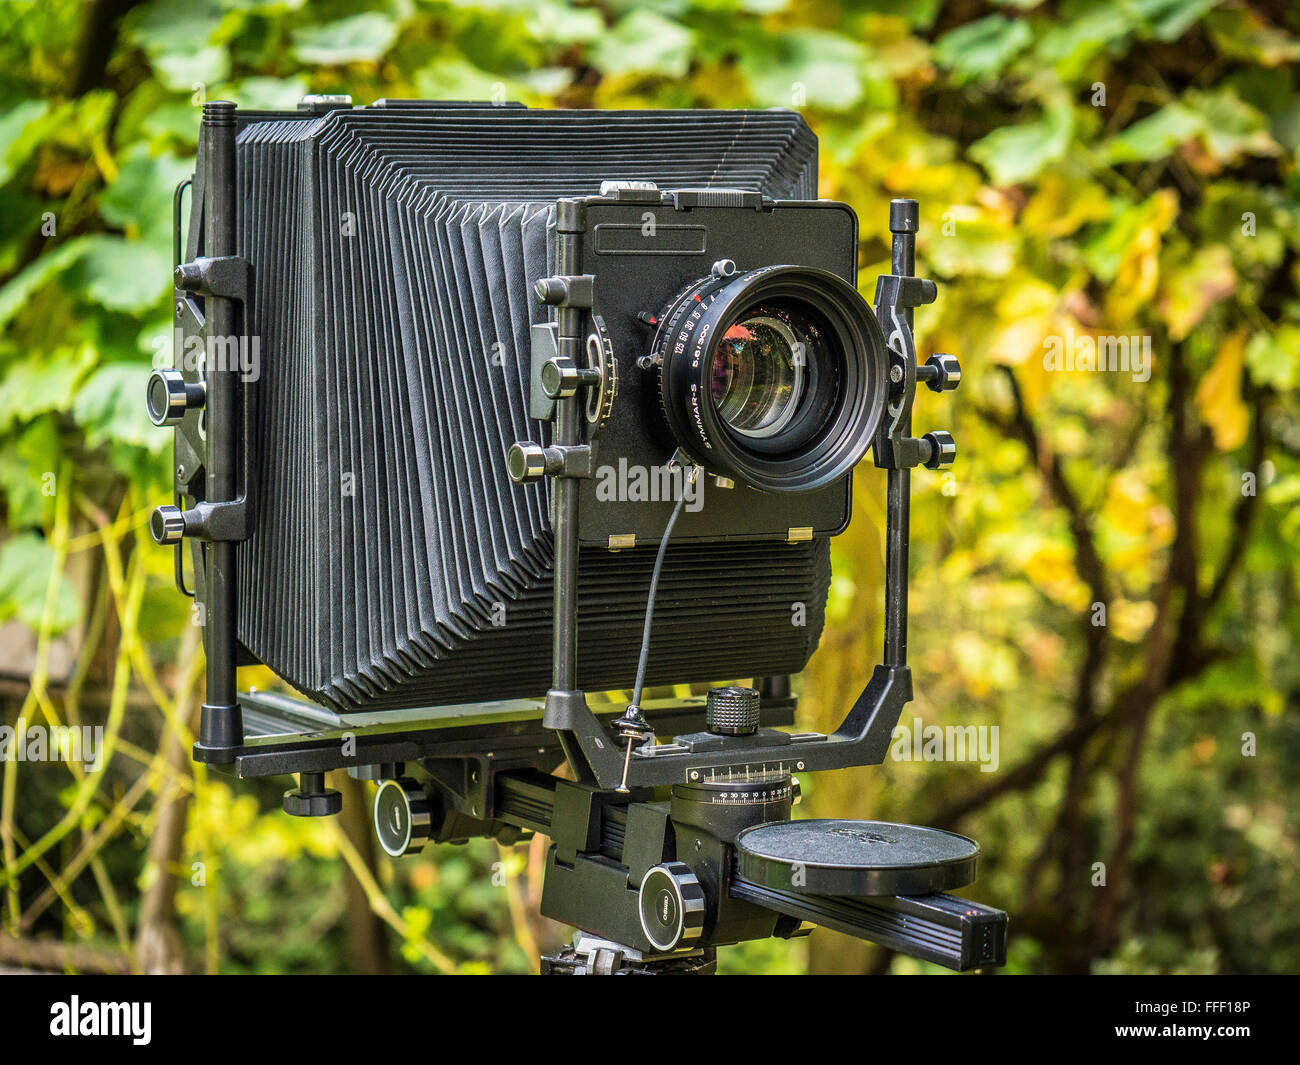 A large format view camera against a green nature background Stock Photo